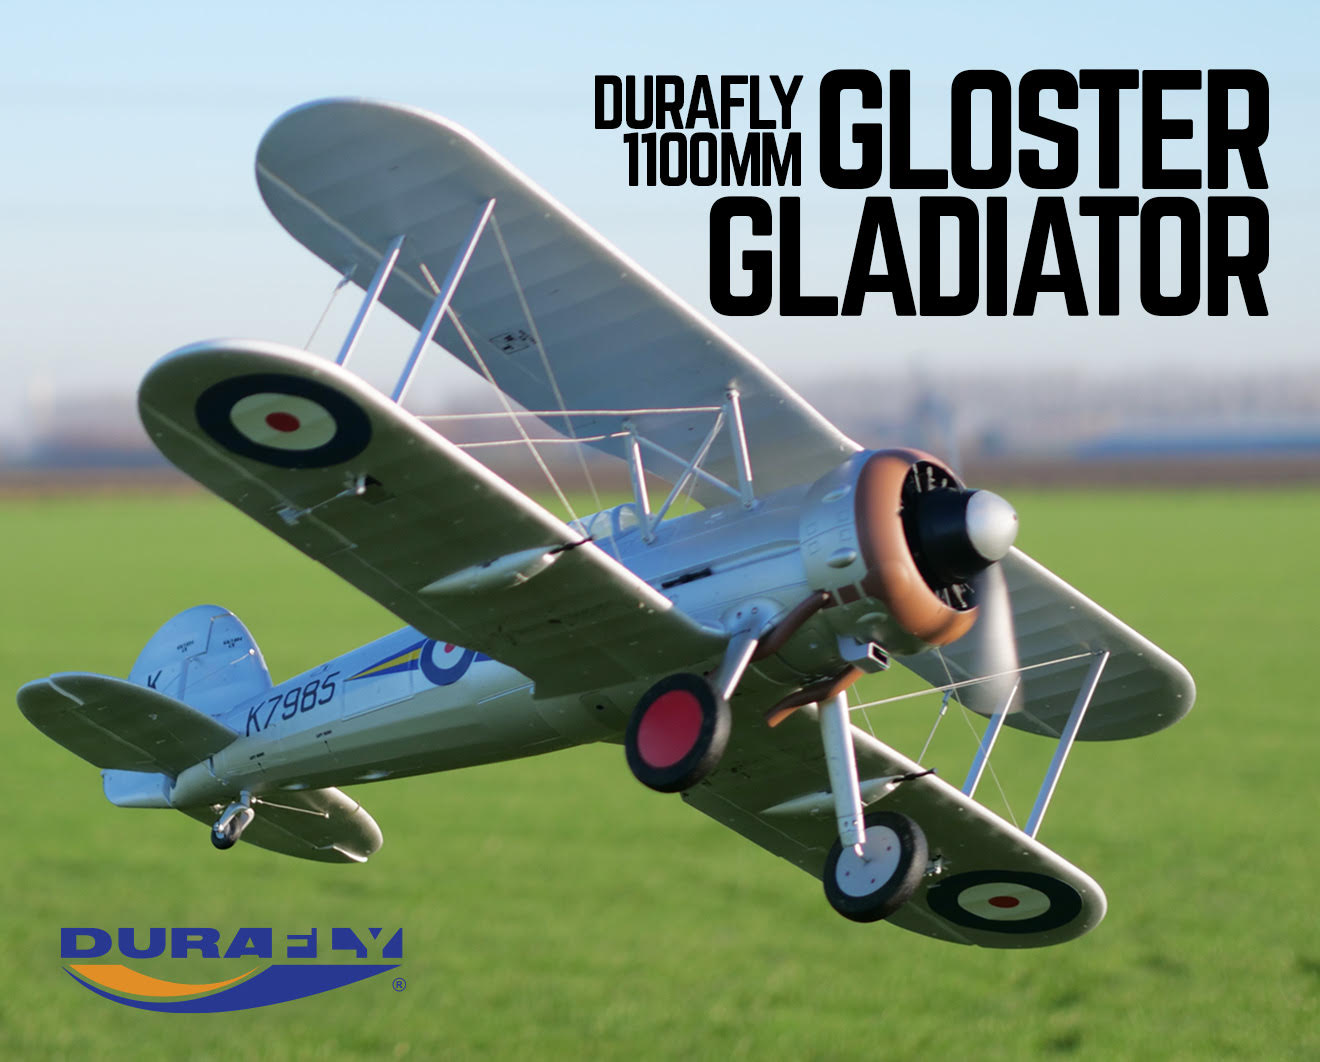 The Durafly Gladiator: Unique to the market. The world's 1st and only EPO Gloster Gladiator.